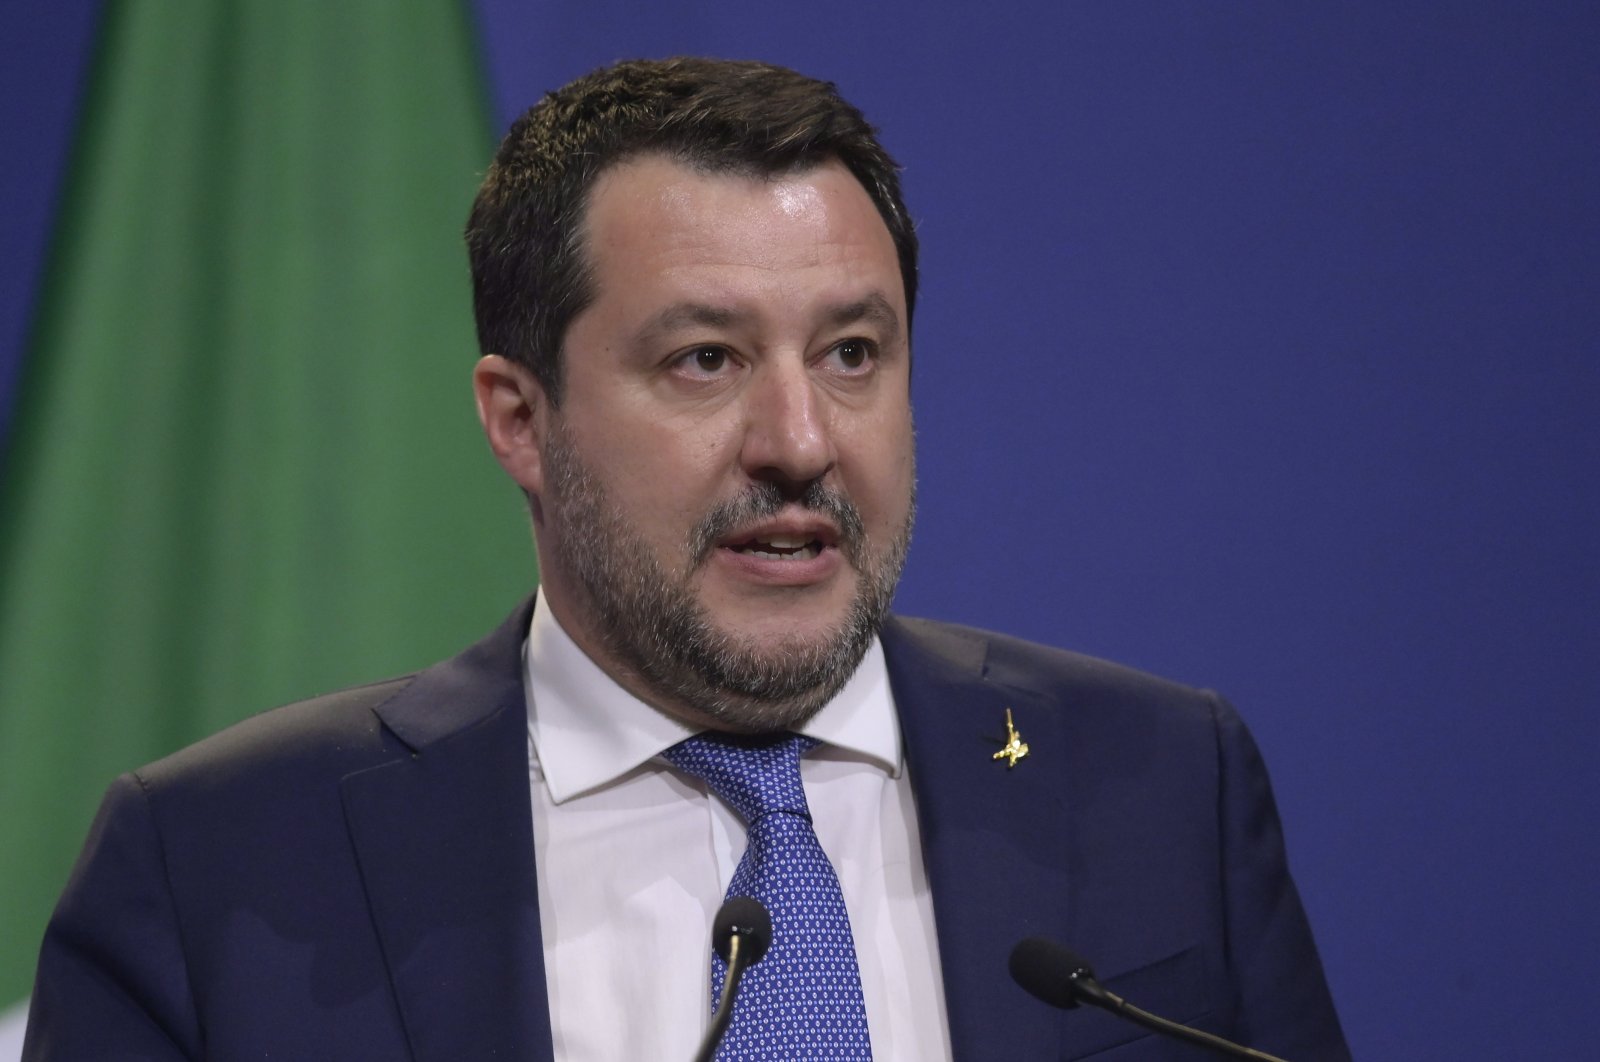 Former Italian minister Salvini to go on trial over migrant kidnapping ...